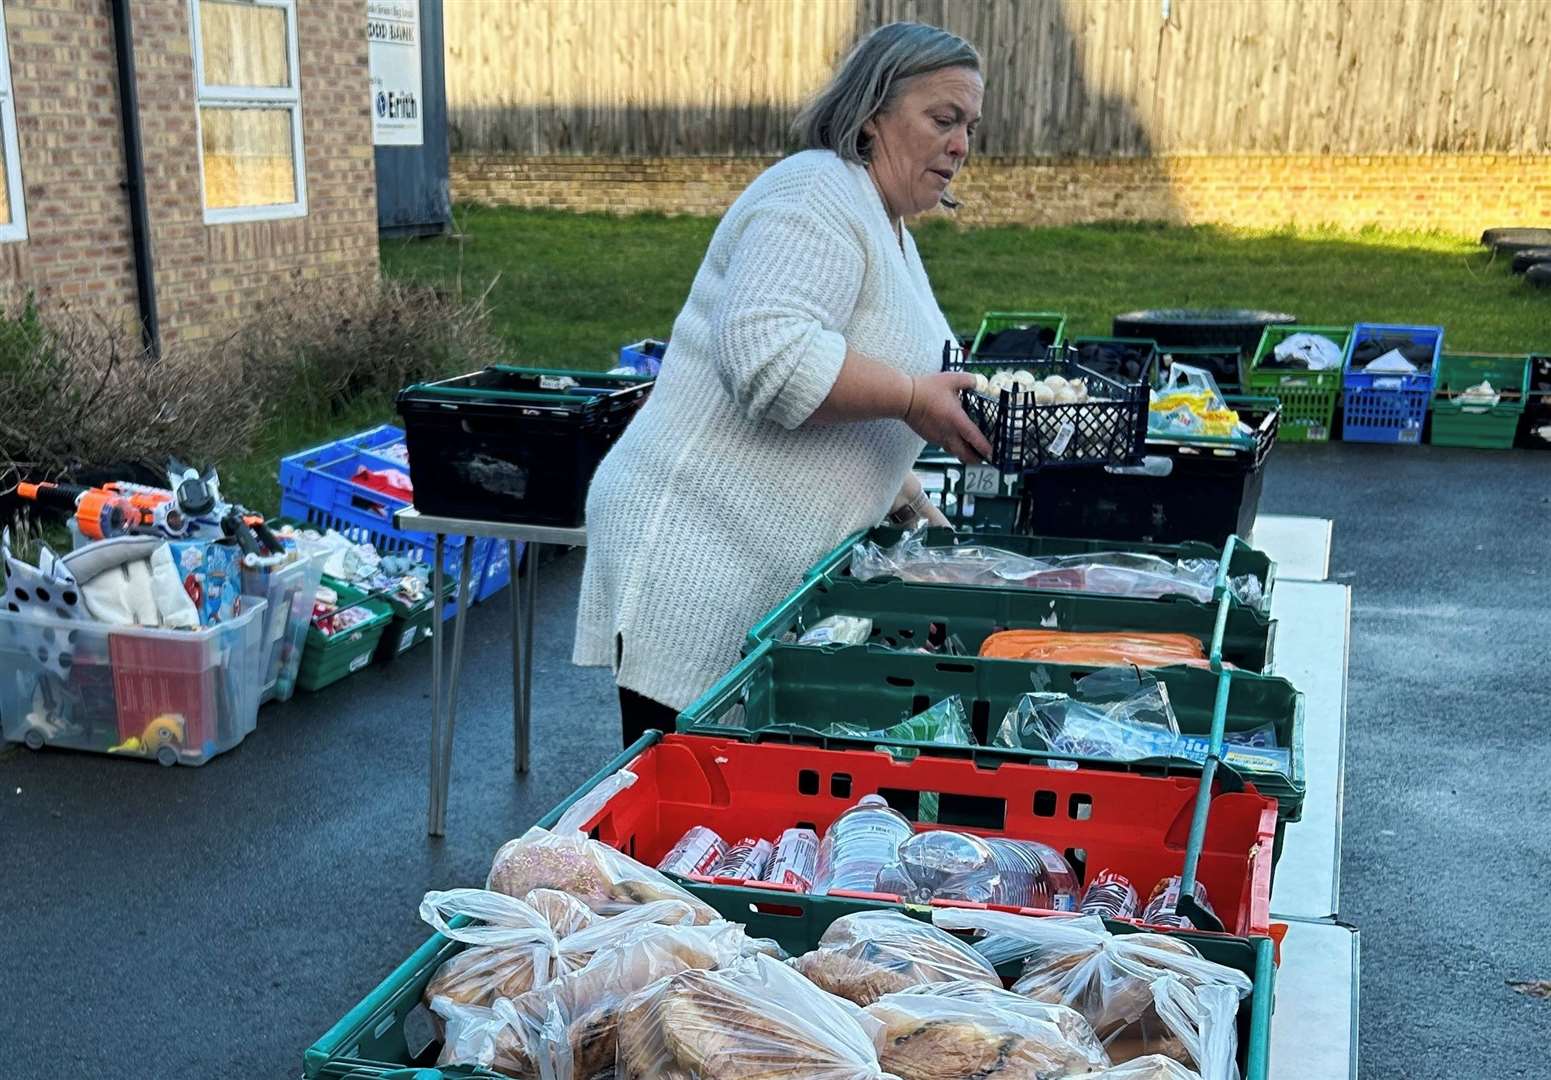 Melanie Hudson is the community project coordinator at the food bank. Picture: Postcode Lottery